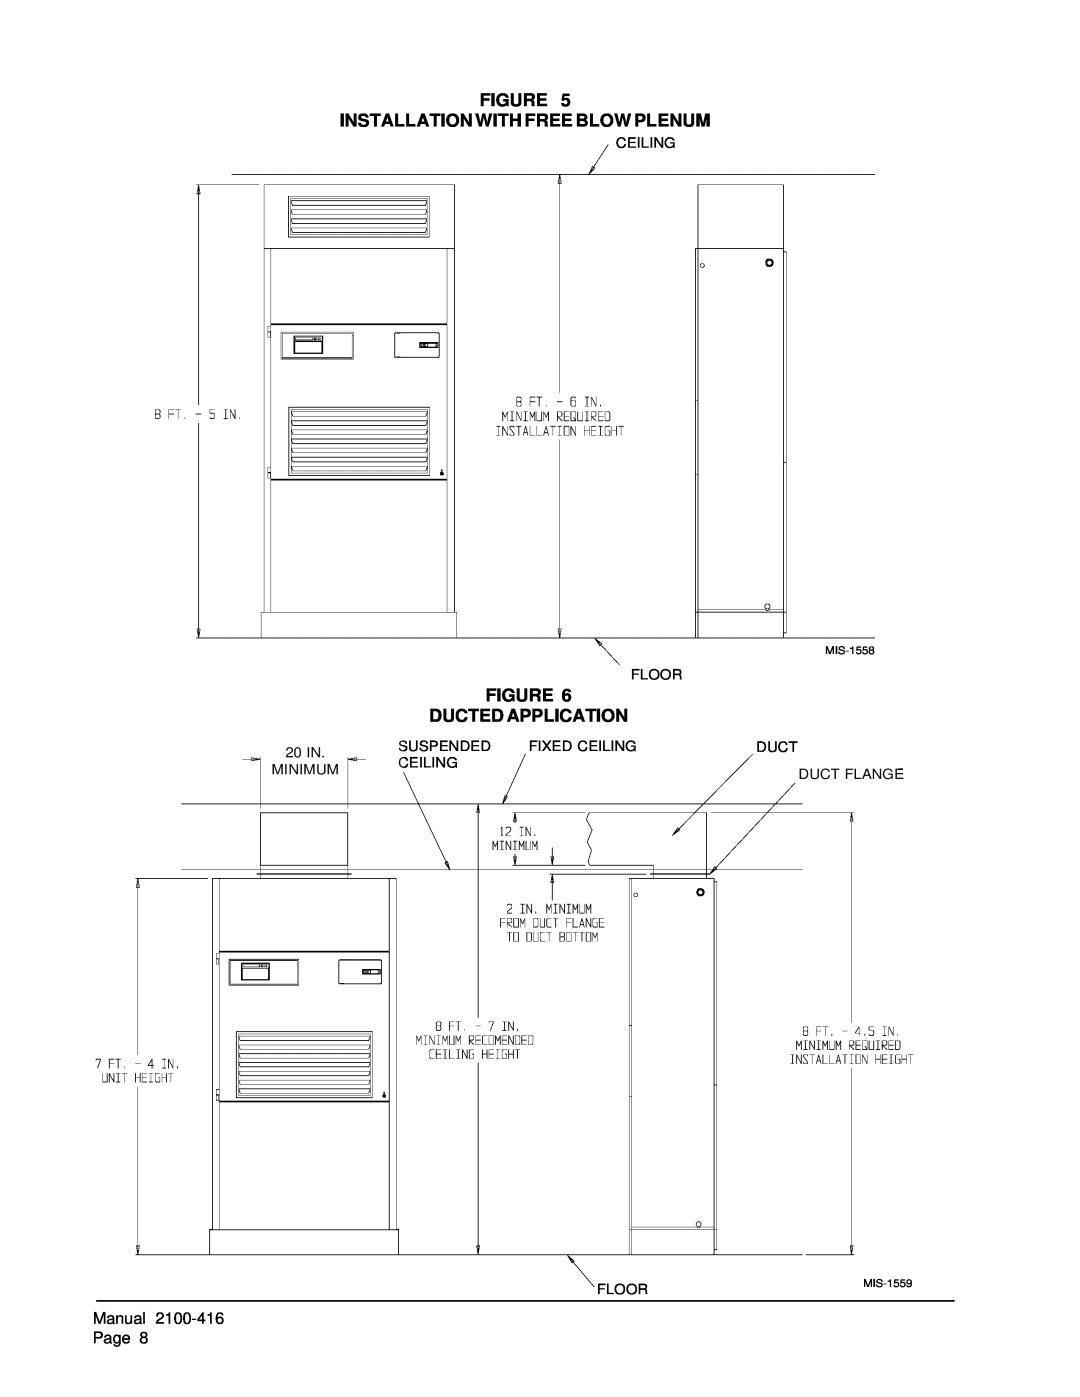 Bard QC501 installation instructions Figure Installation With Free Blow Plenum, Figure Ducted Application 